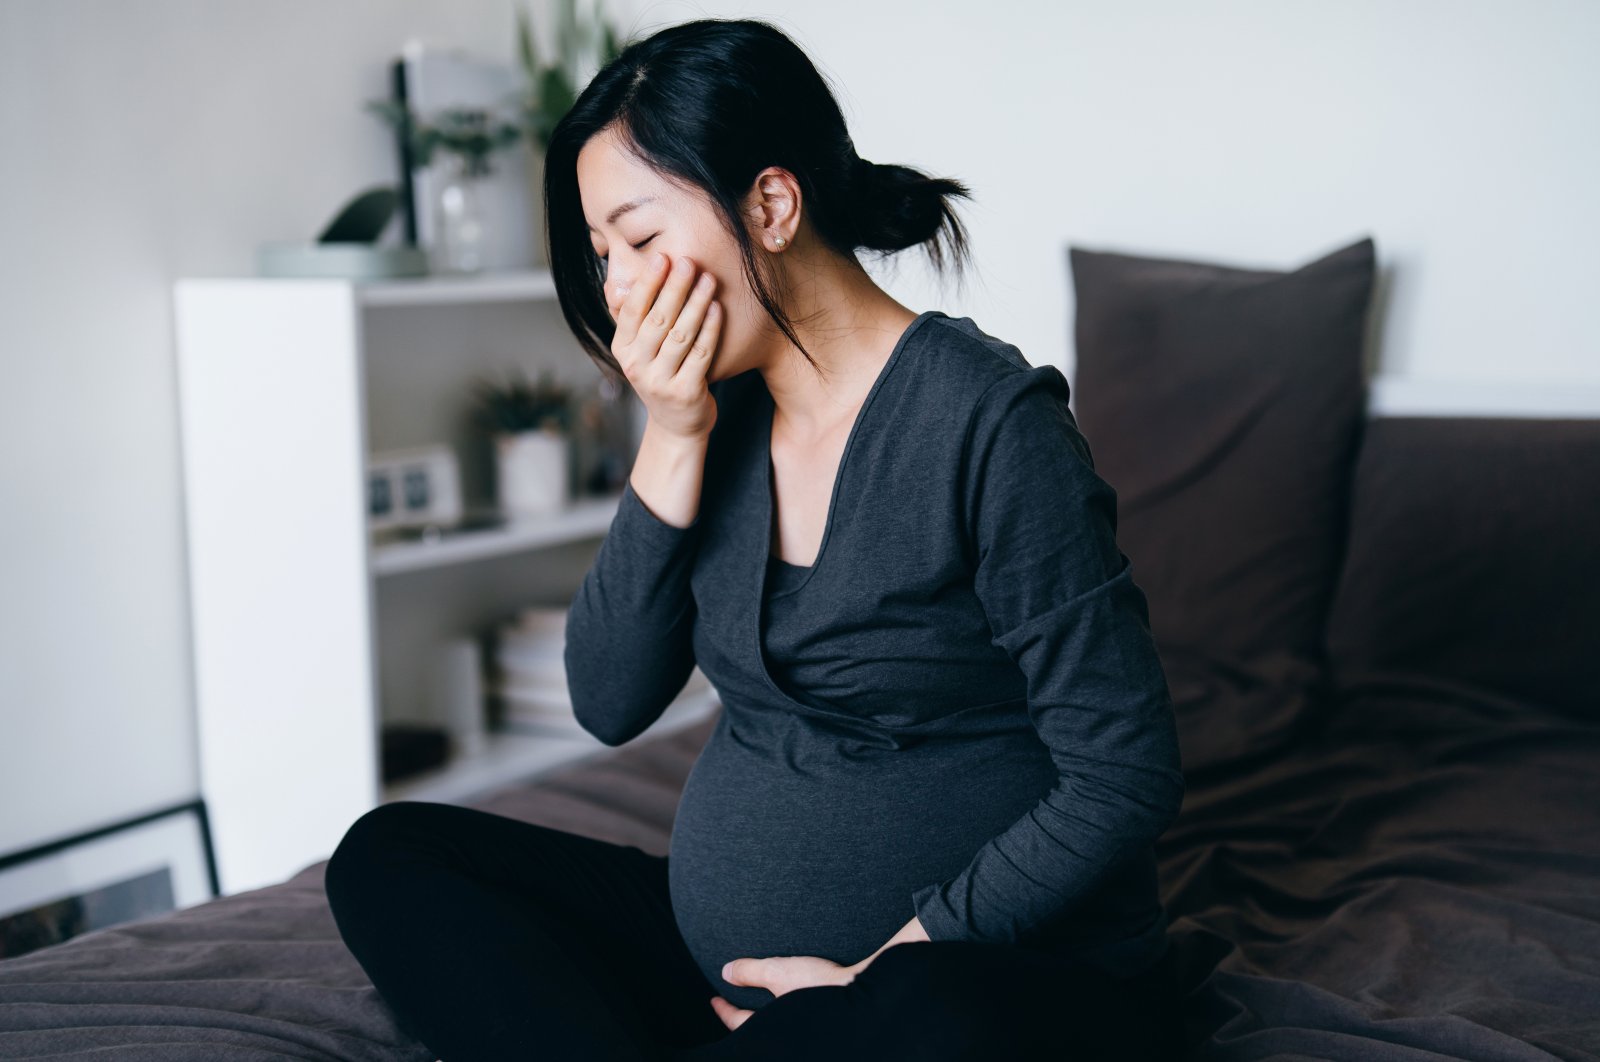 A young pregnant woman sitting on her bed, feeling nauseous and covering her mouth, suffering from morning sickness in this undated file photo. (Getty Images)